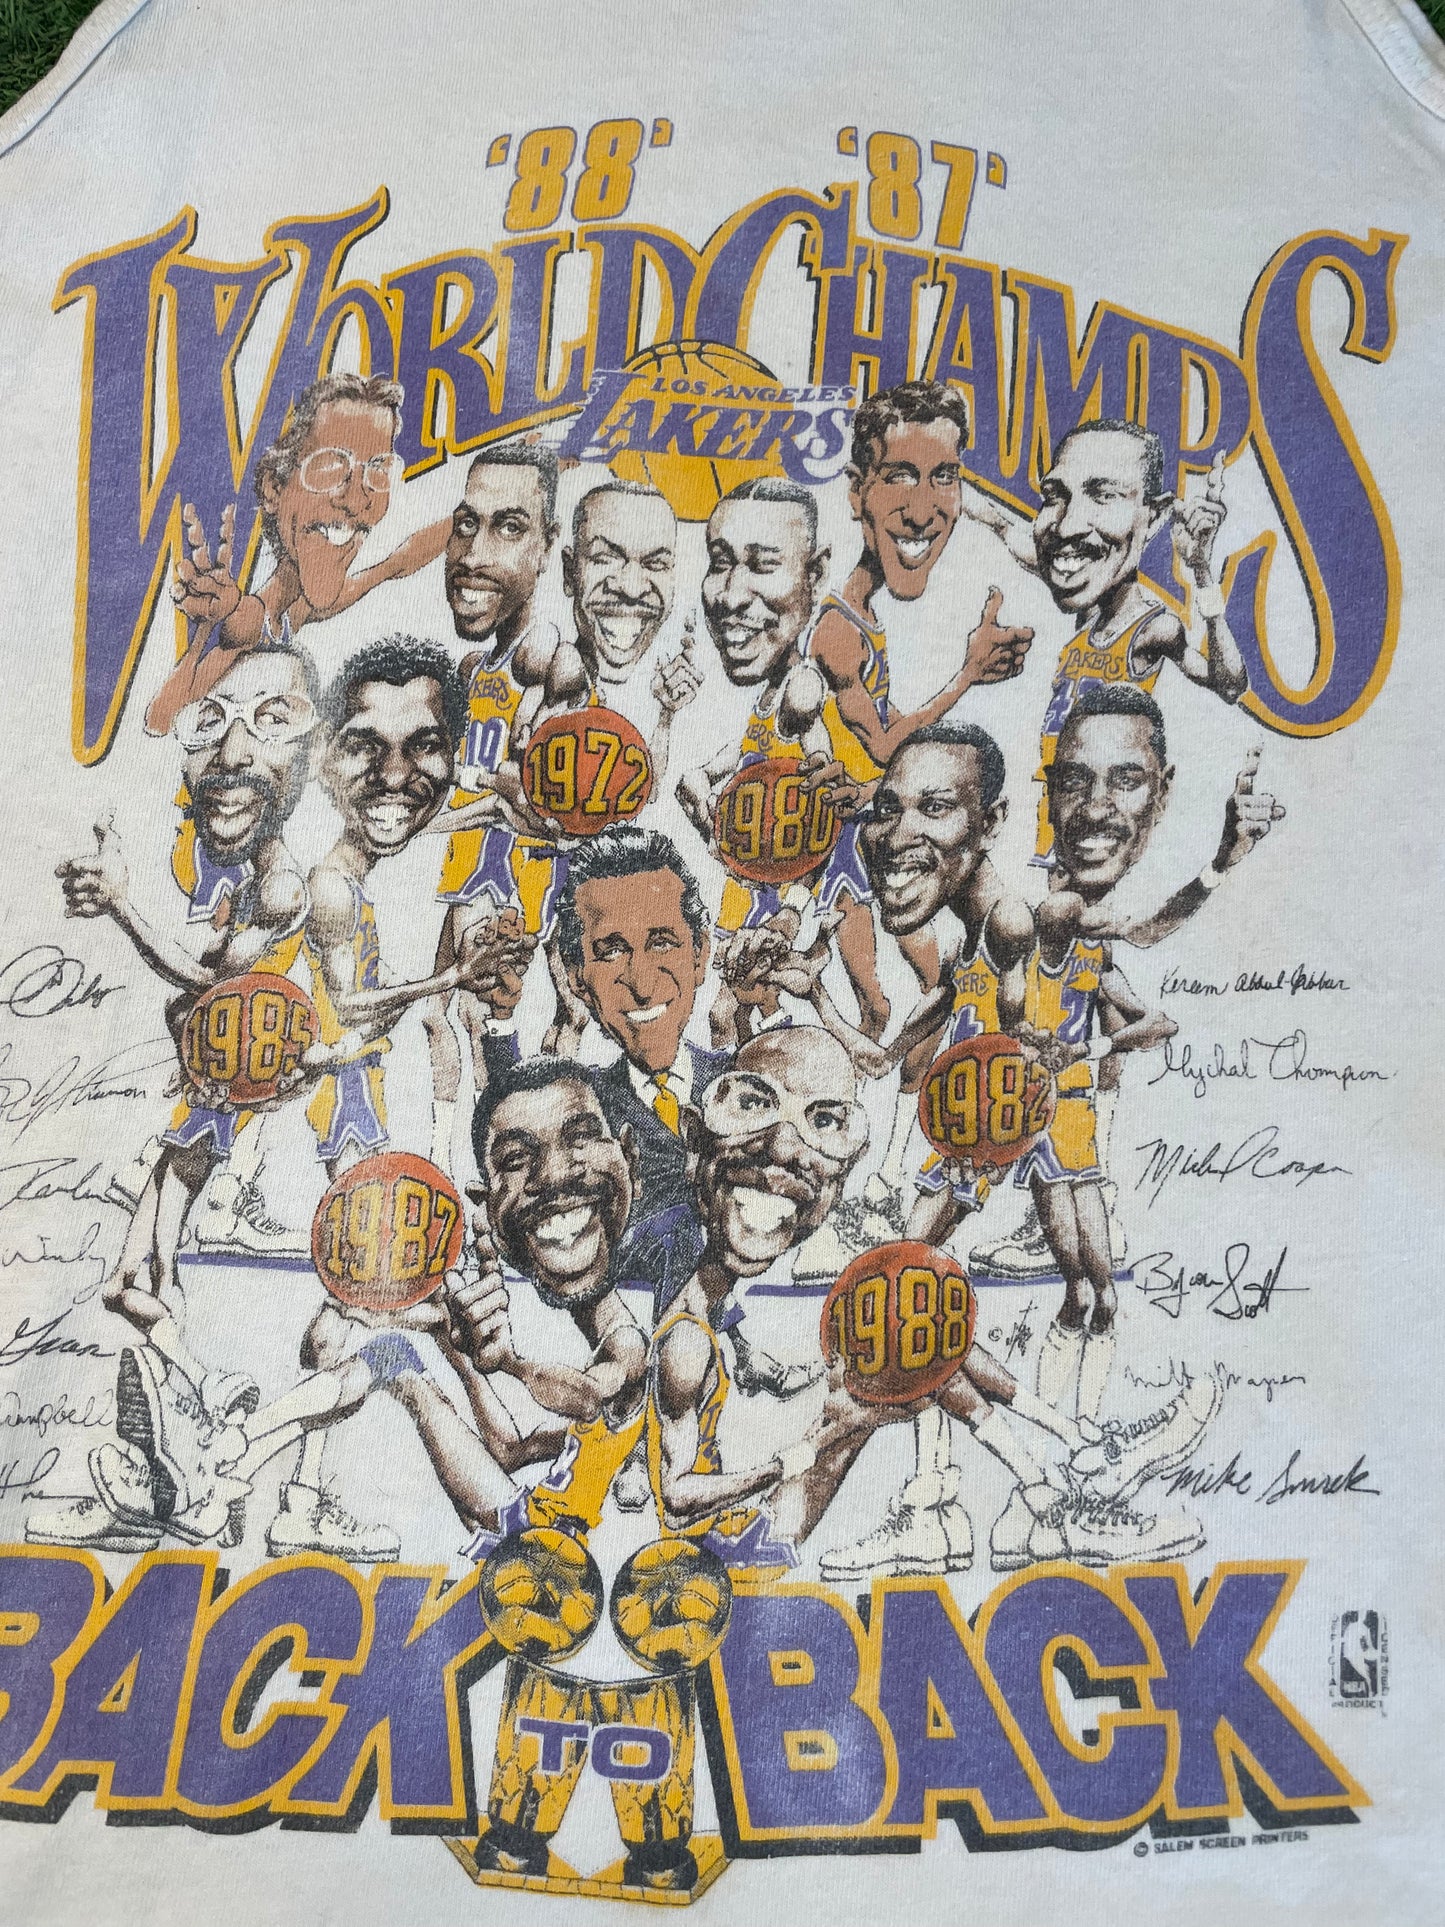 Lakers 87 & 88 champs (M)